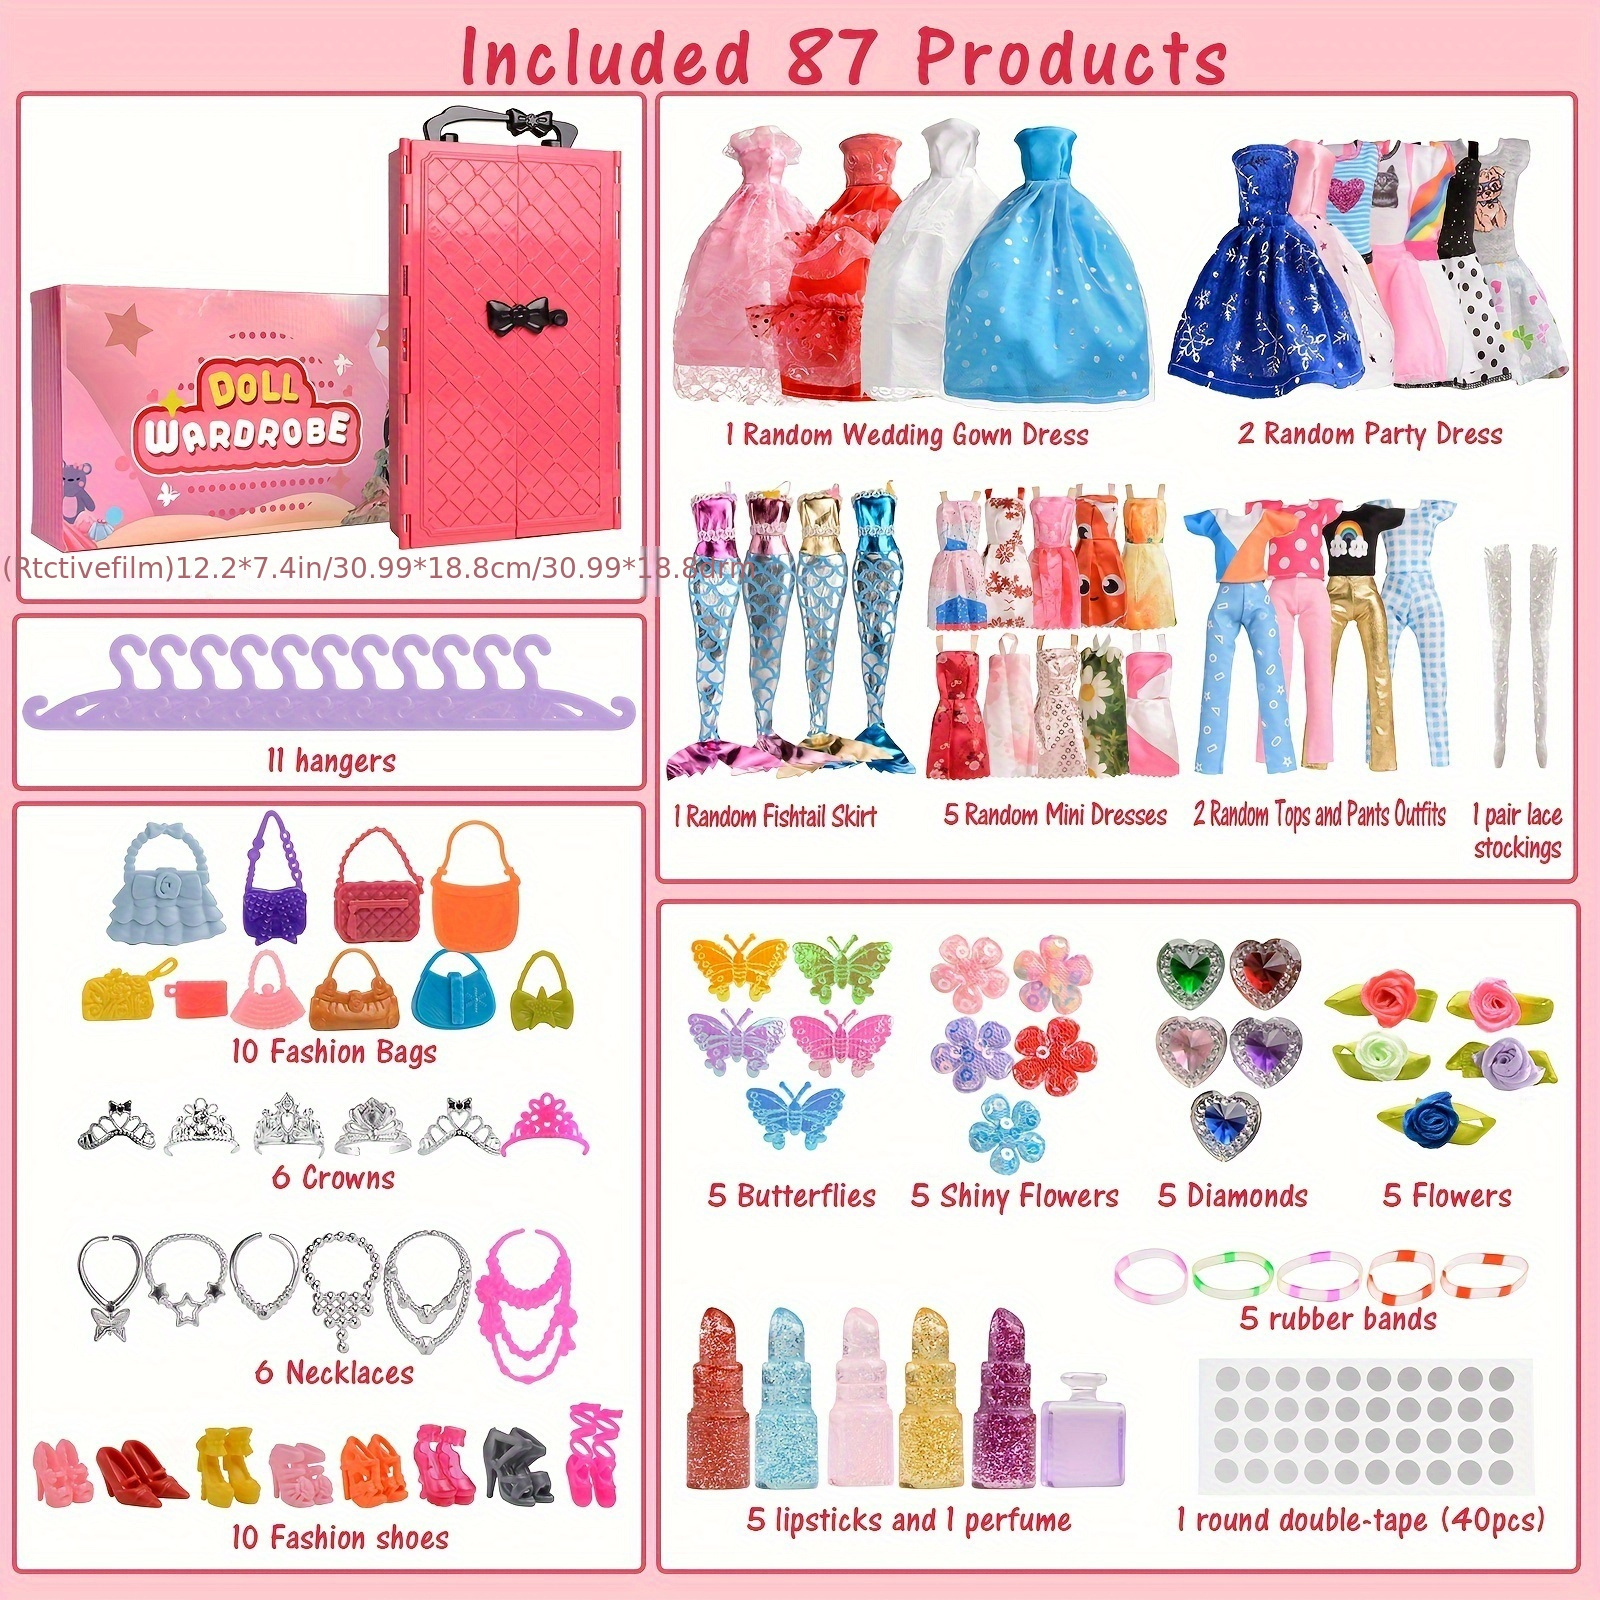 

87pcs 11 In Doll Closet Wardrobe Include Clothes, Dresses, Shoes And Other Doll Stuff For 11.5 In Doll, Xmas Gift, No Doll